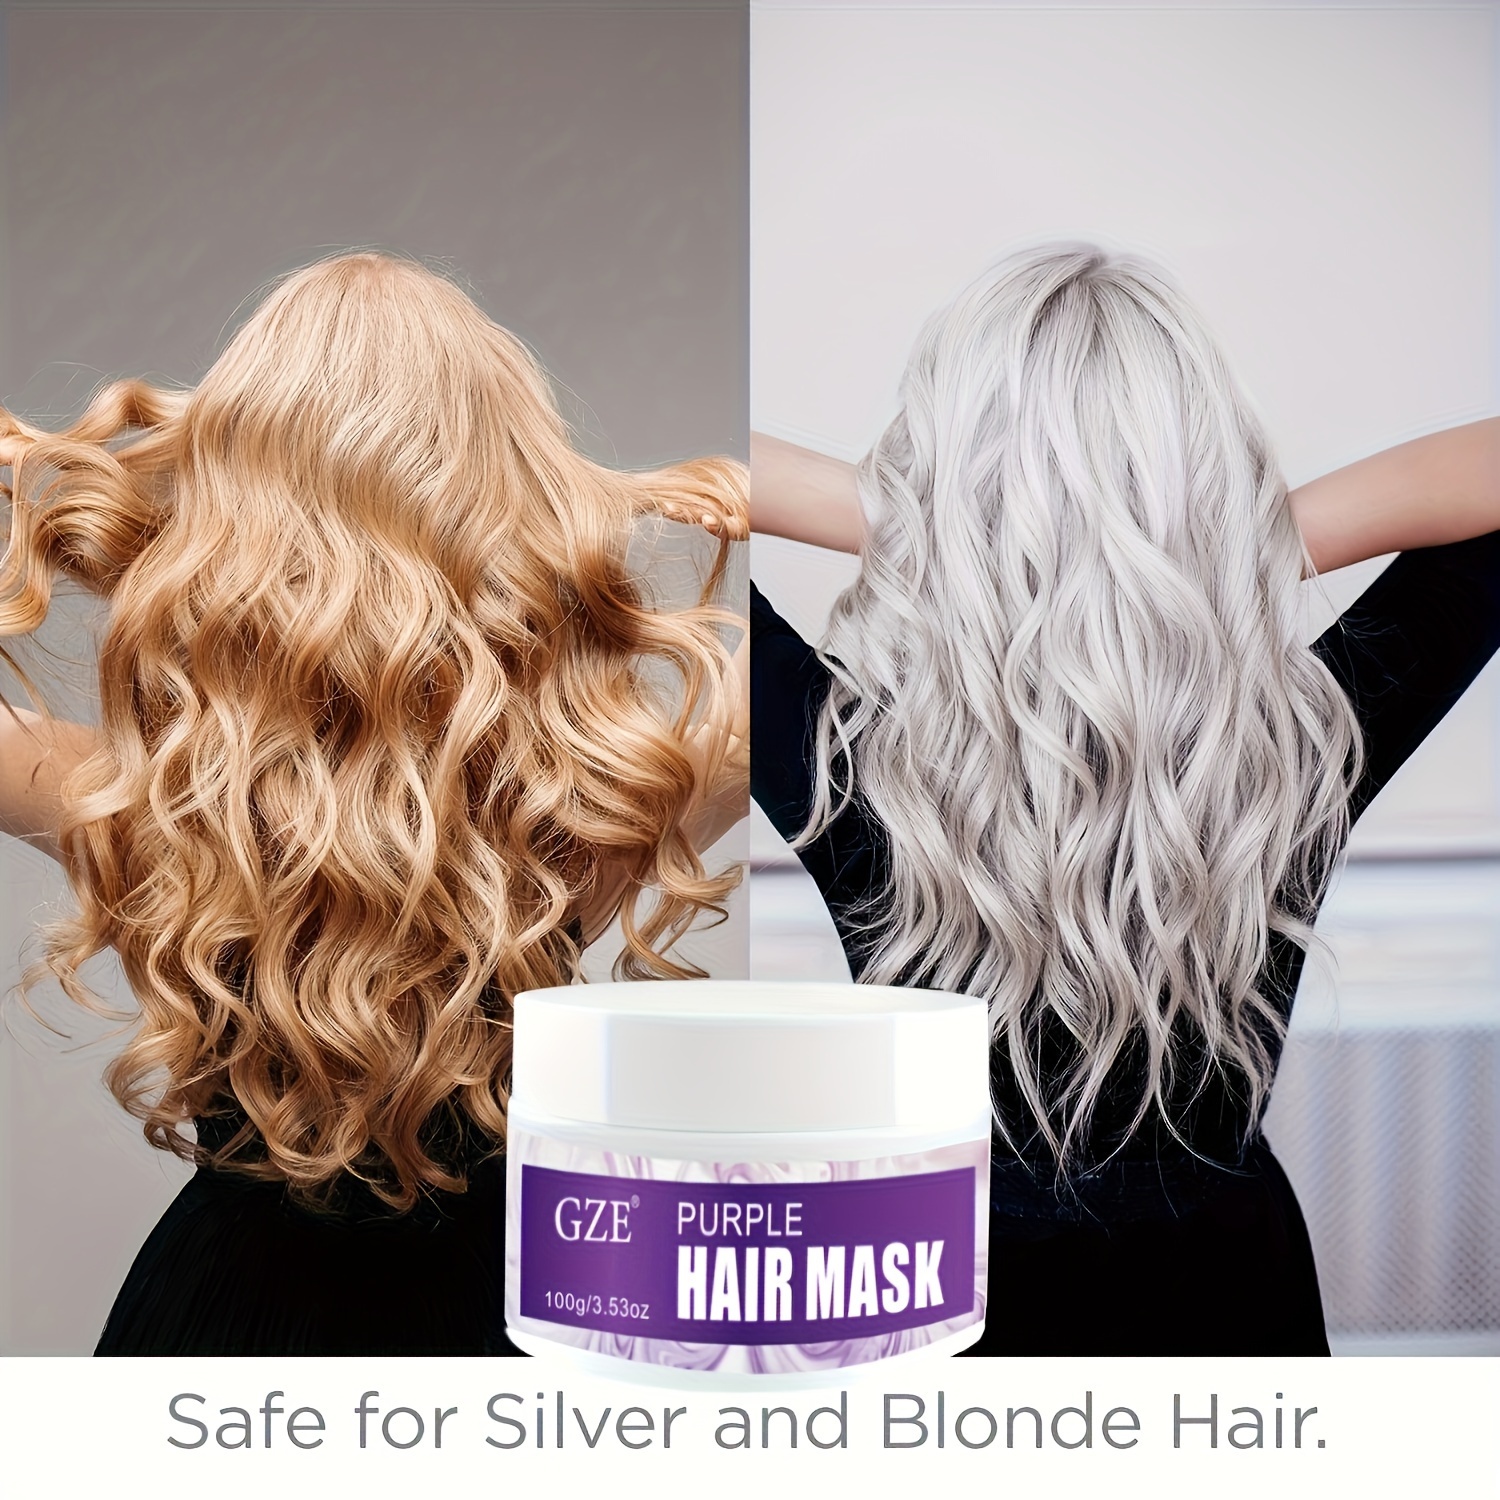 

Purple Hair Mask For Blonde, Silver, Gray- Brass Remove Yellow Tones & Brassiness From Highlighted, Bleached Hair Butter With Argan Oil & Jojoba Oil Cream